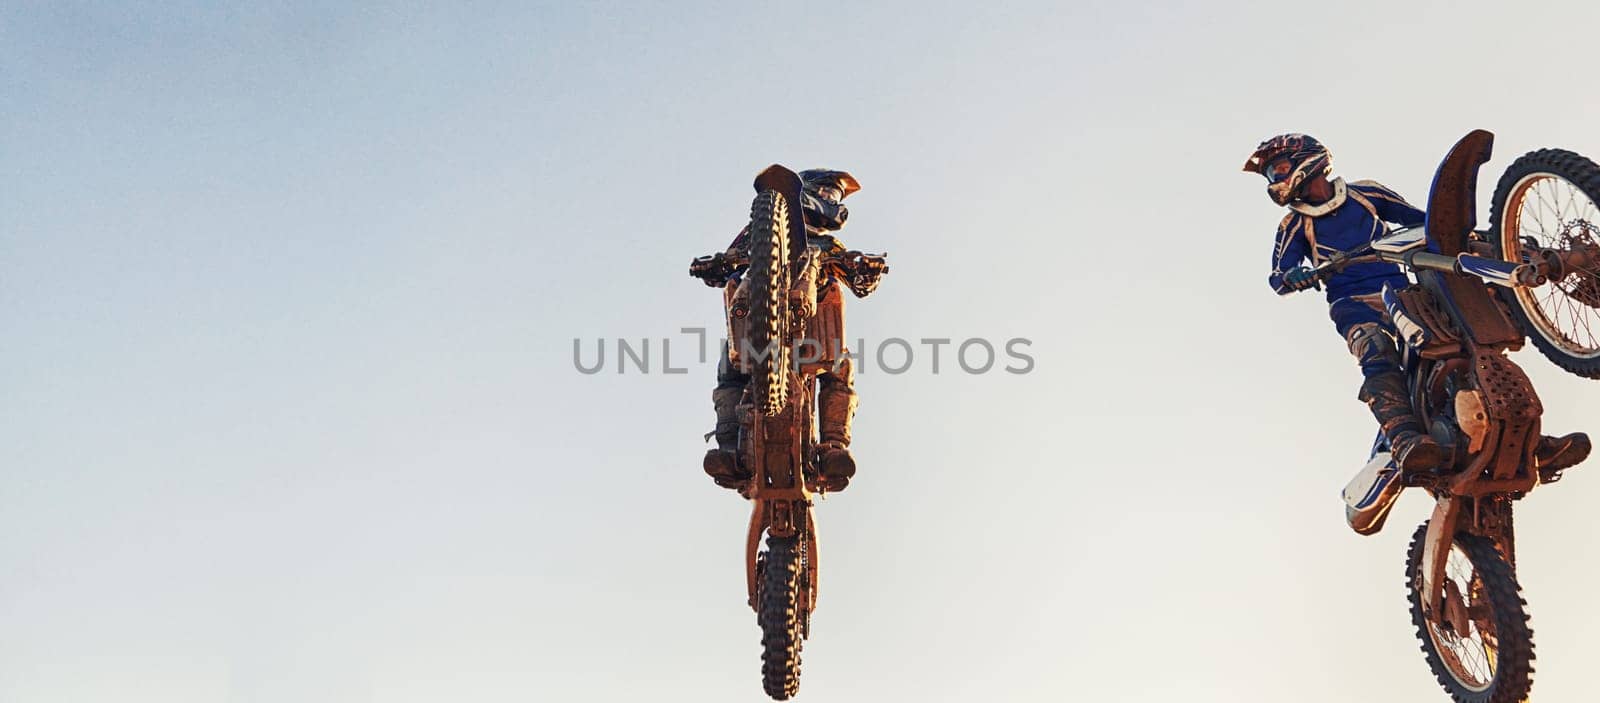 Sky, jump and men on motorcycle together for stunt at competition, training or challenge with banner mockup. Adventure, professional or athlete in air on motorbike for hobby, extreme sports or trick. by YuriArcurs